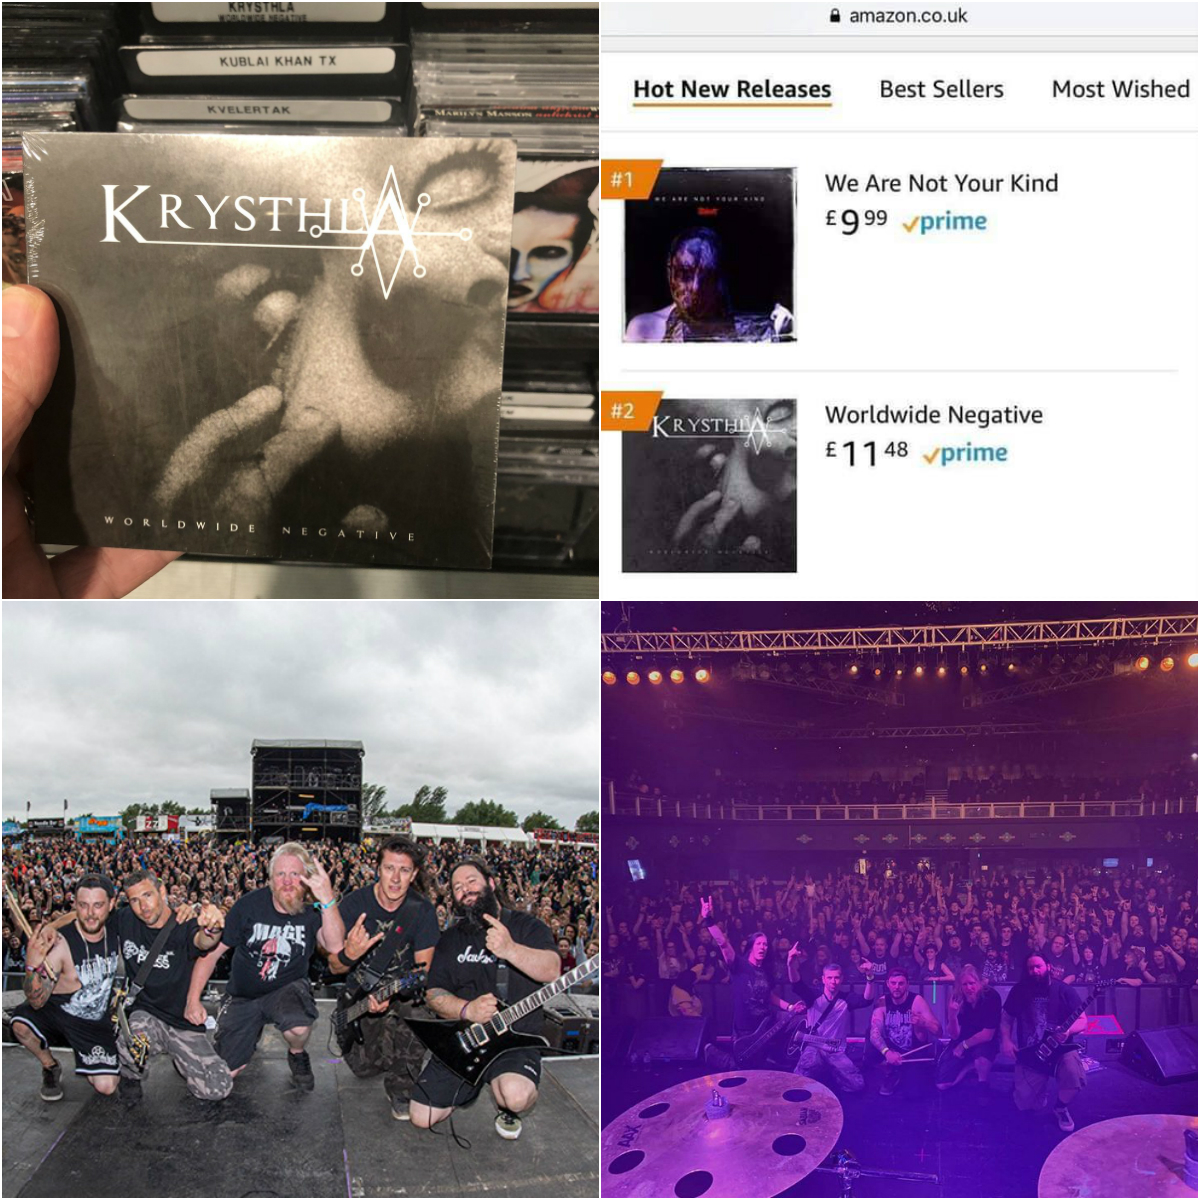 Worldwide Negative celebrates it's first official birthday! Released on this day last year... what are your favourite tracks from this album?

#KrysthlaWWN #KrysthlaStampede #HMV #Amazon #Slipknot #BloodstockFestival #BOA19 #HRHMetal #HRH